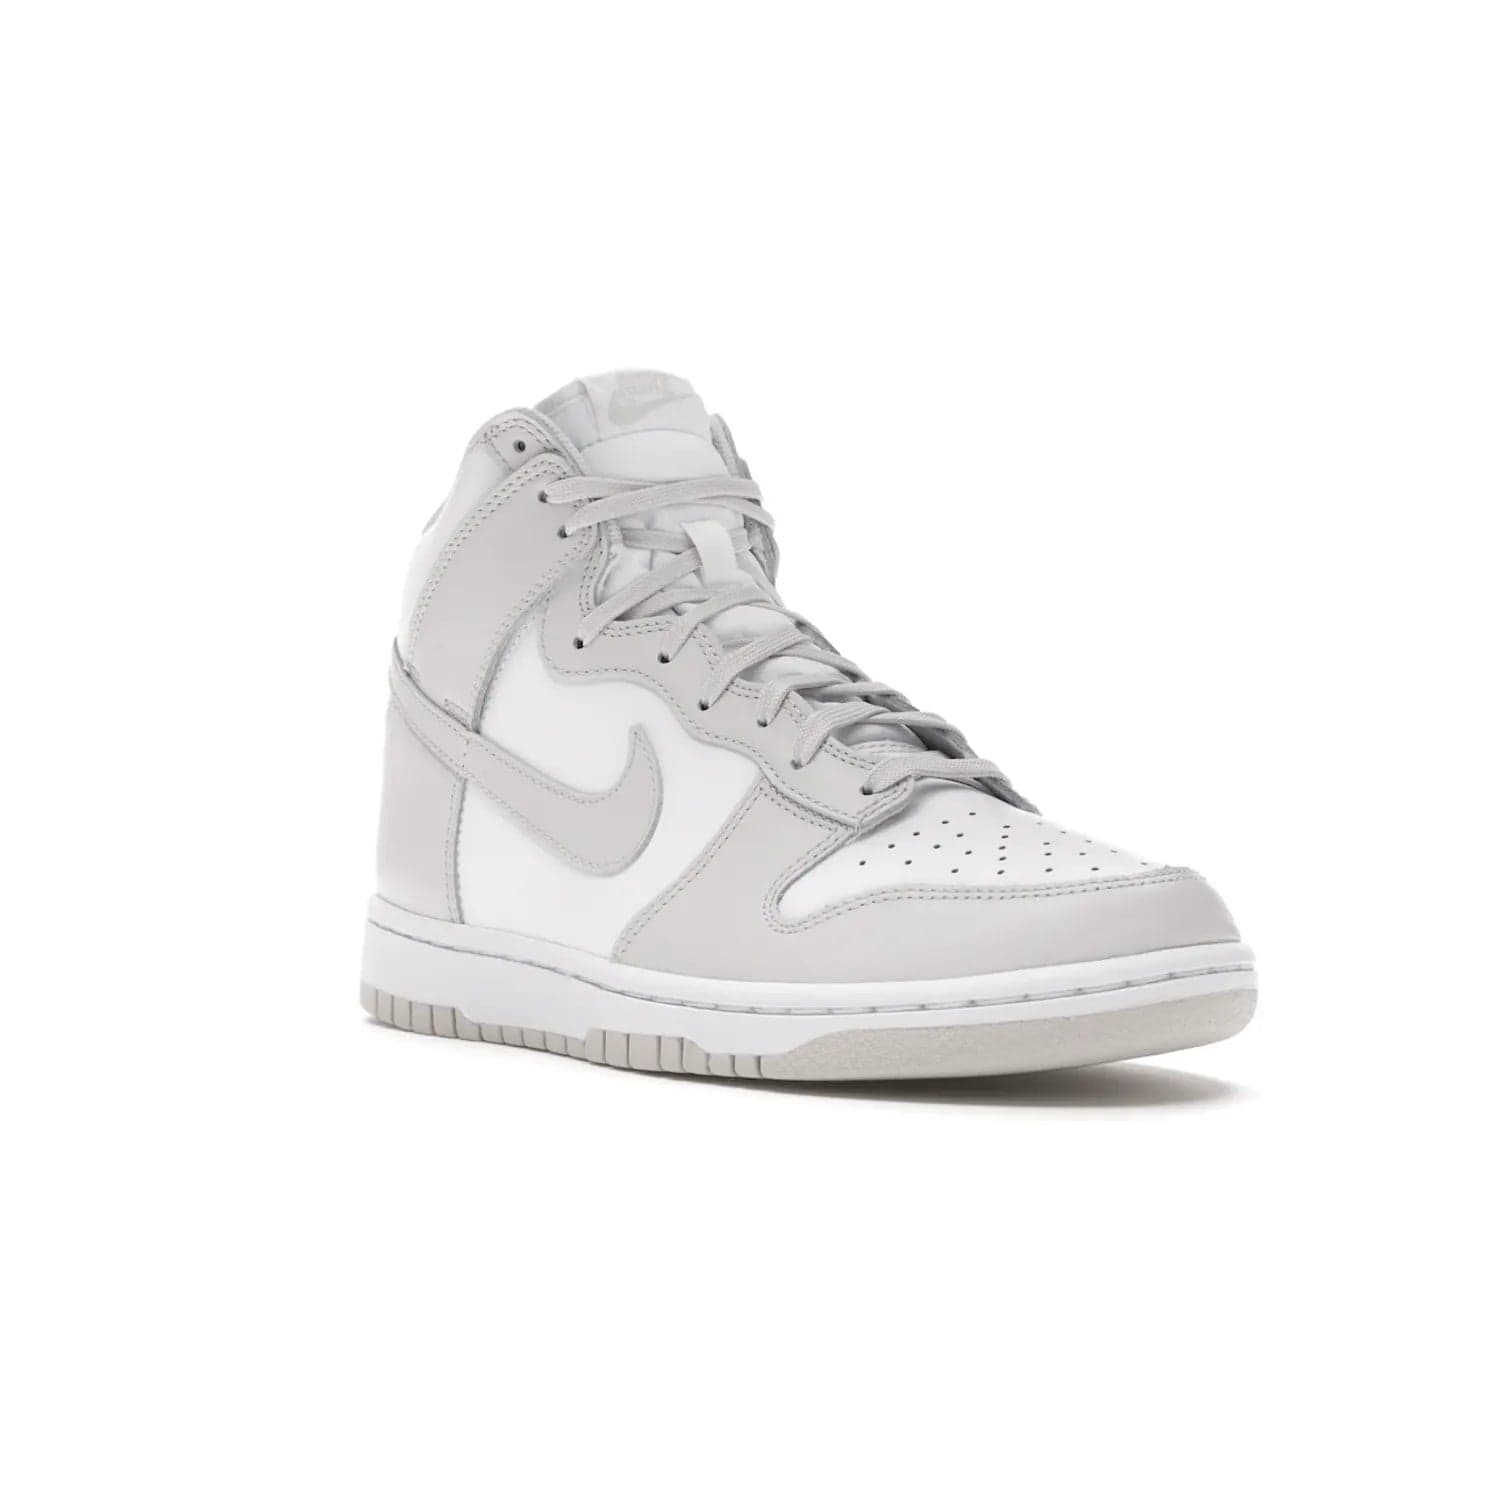 Nike Dunk High Retro White Vast Grey (2021) - Image 6 - Only at www.BallersClubKickz.com - Nike Dunk High Retro White Vast Grey 2021: classic '80s basketball sneaker with a crisp white base, grey overlays, midsole tooling and outsole. Dropped Feb. 2021.